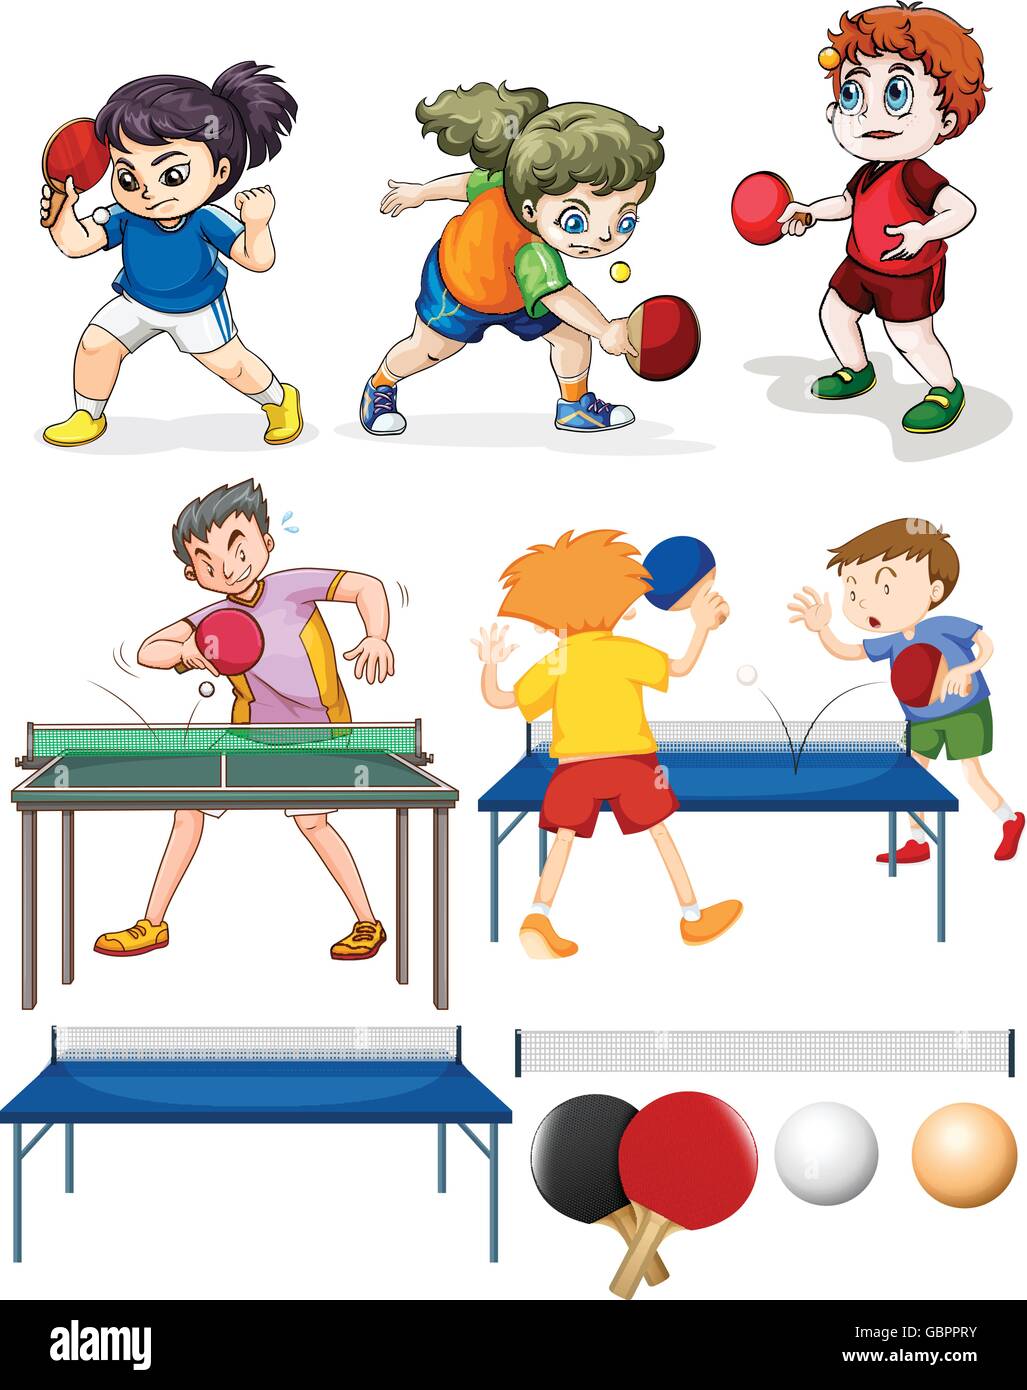 Many people playing table tennis illustration Stock Vector